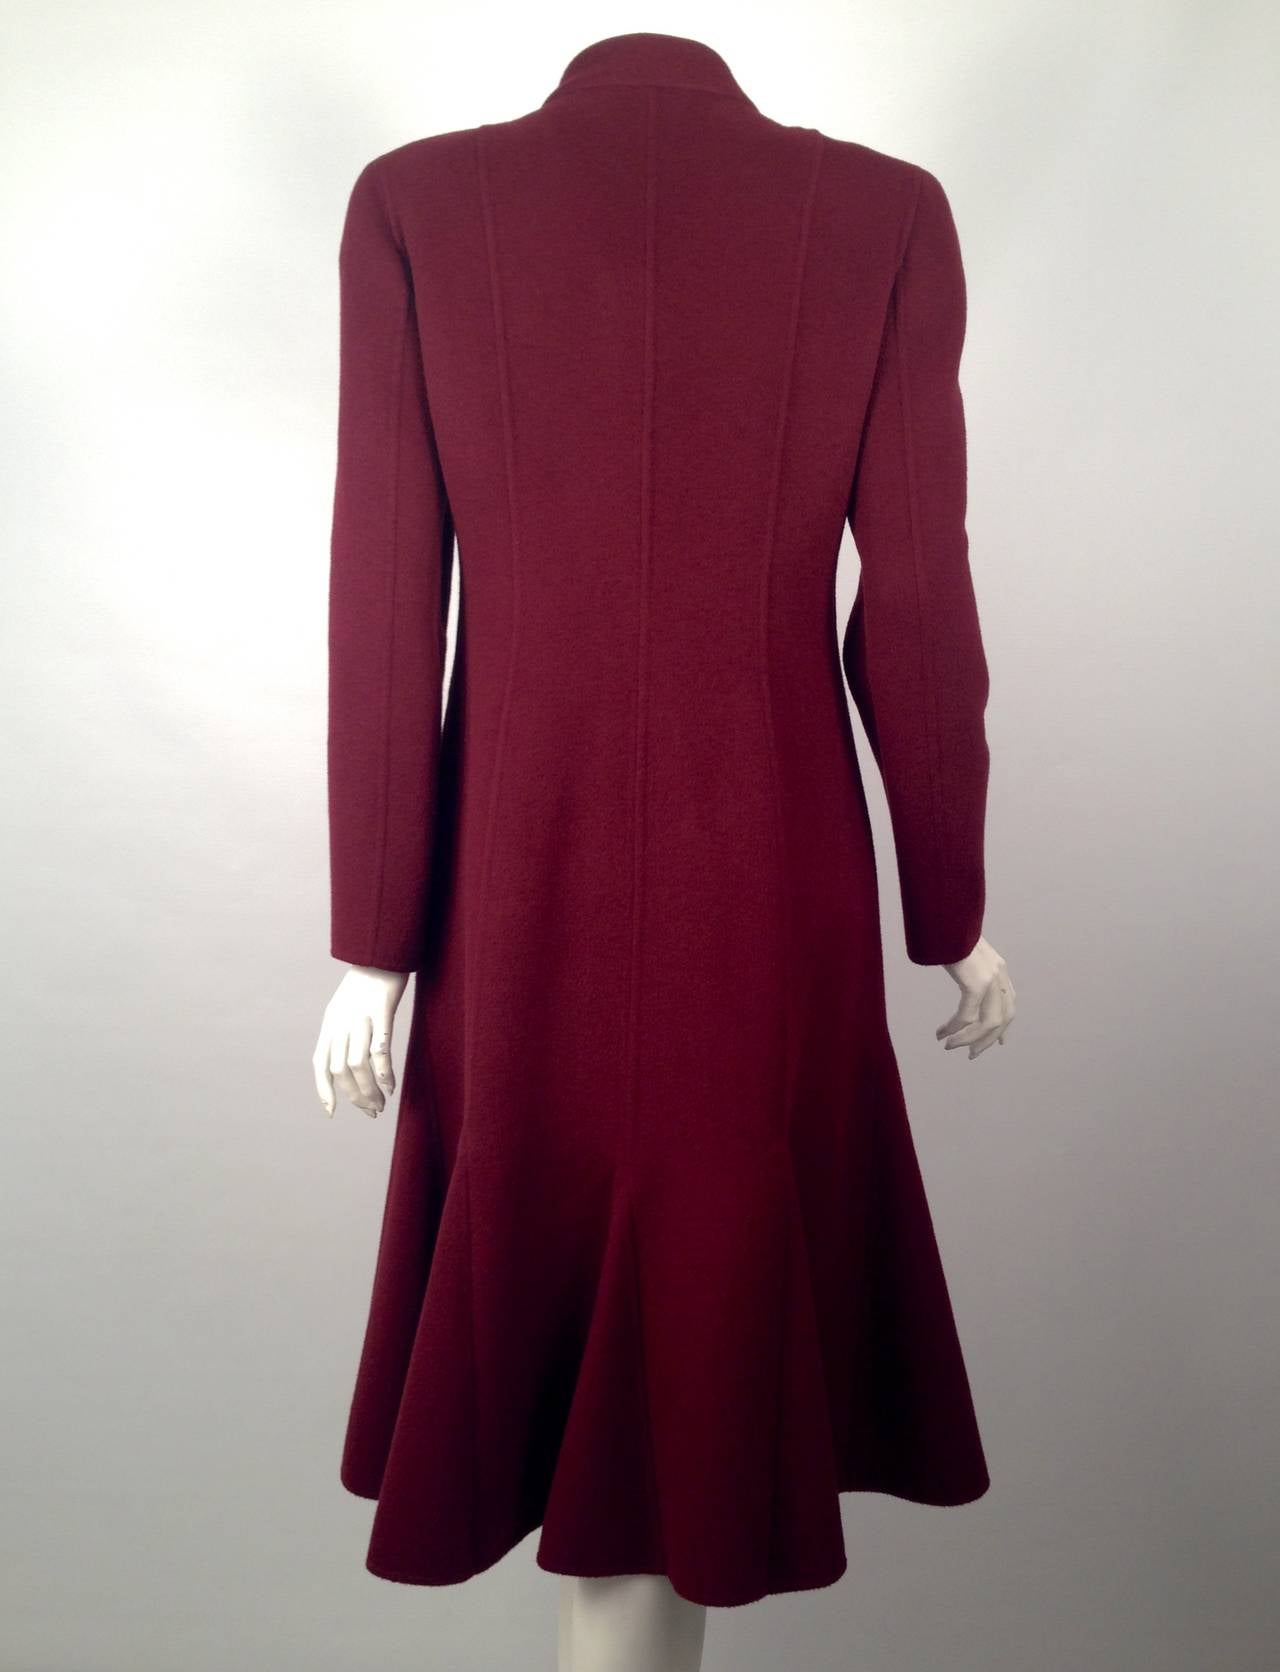 Valentino Burgundy Wool and Cashgora Coat With Godet Hemline illustrates an haute couturier's passion for detail!  Only the finest wool and cashgora blend would suffice.  Features include stand up collar and a five-button closure elegantly concealed